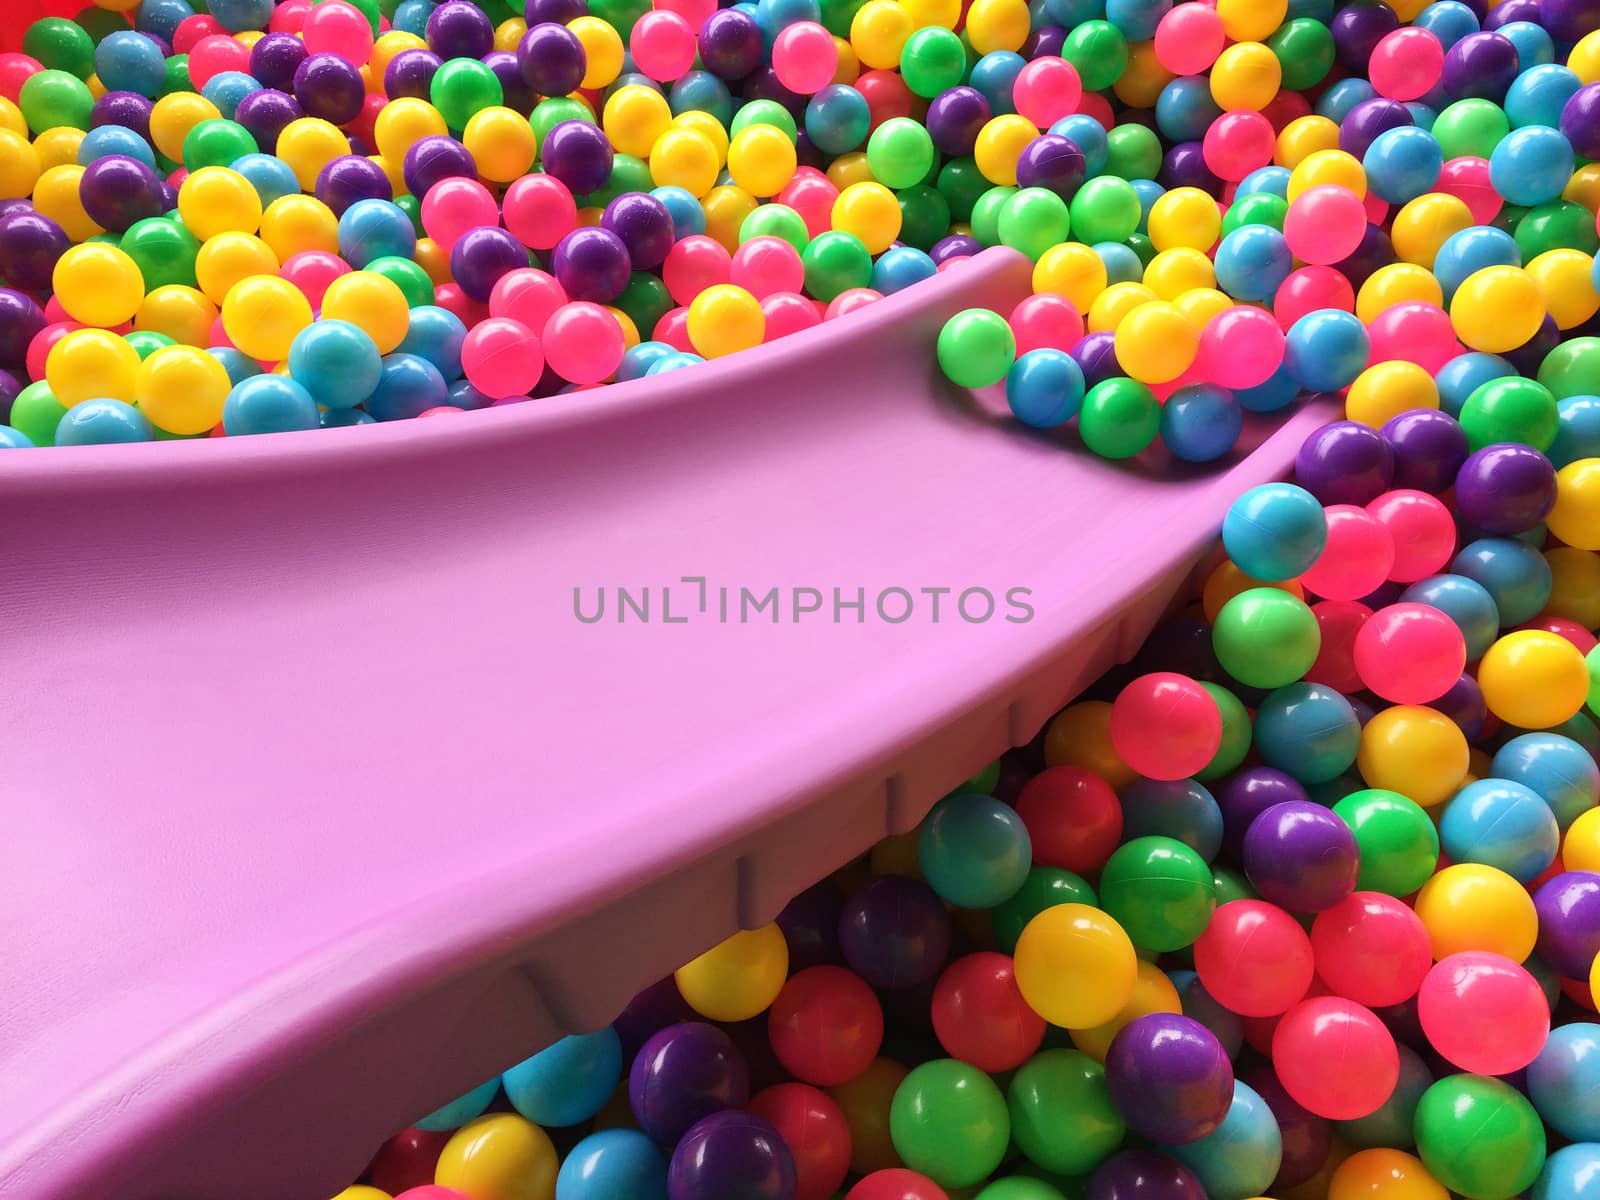 dry children's pool with colorful balls by Bowonpat